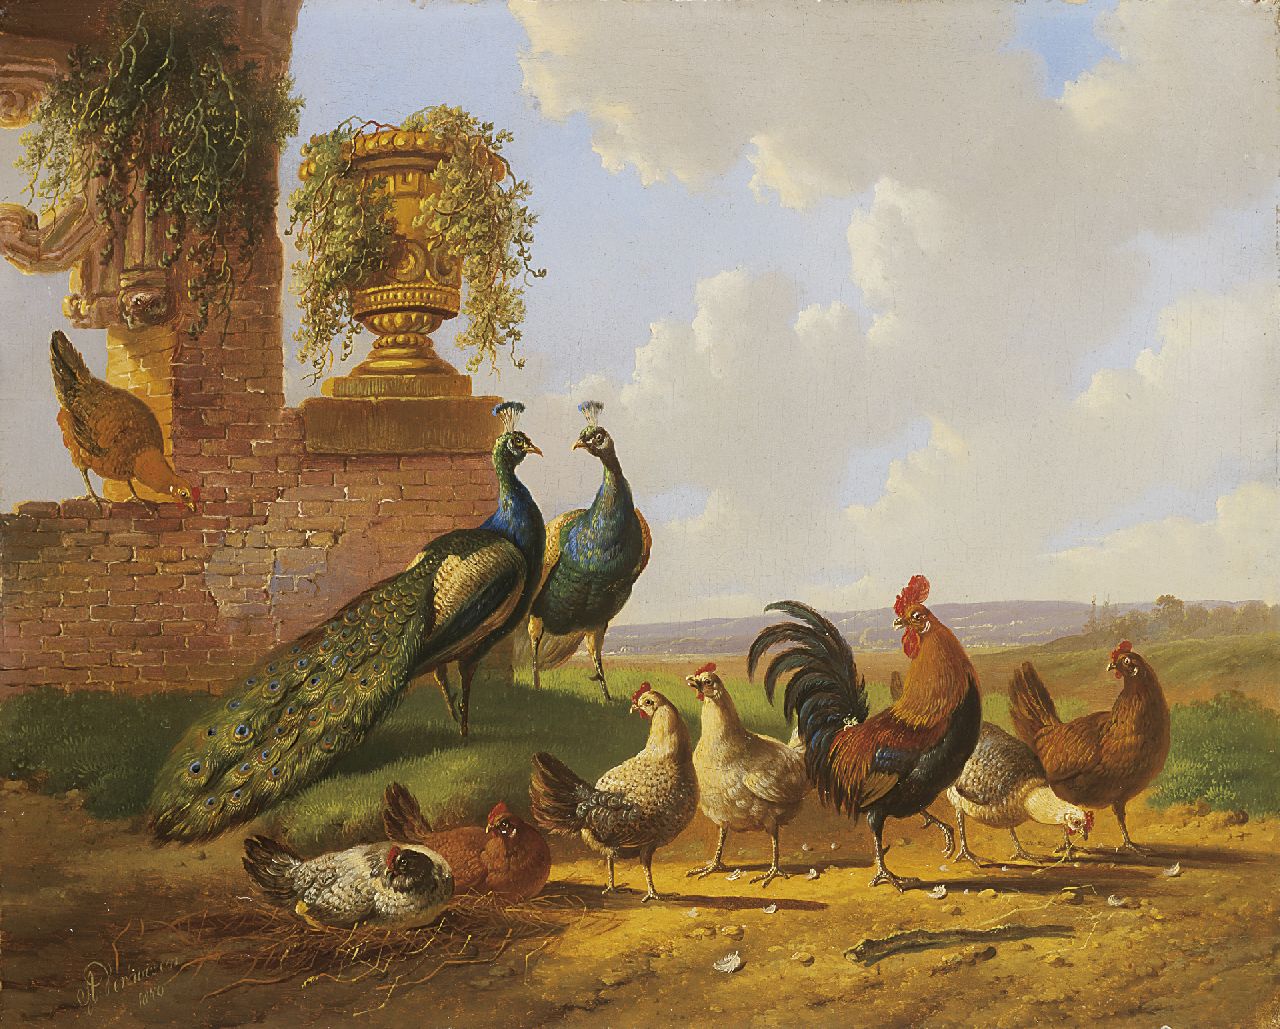 Verhoesen A.  | Albertus Verhoesen, Peacocks and chickens by a ruin, oil on panel 30.3 x 37.5 cm, signed l.l. and painted 1870